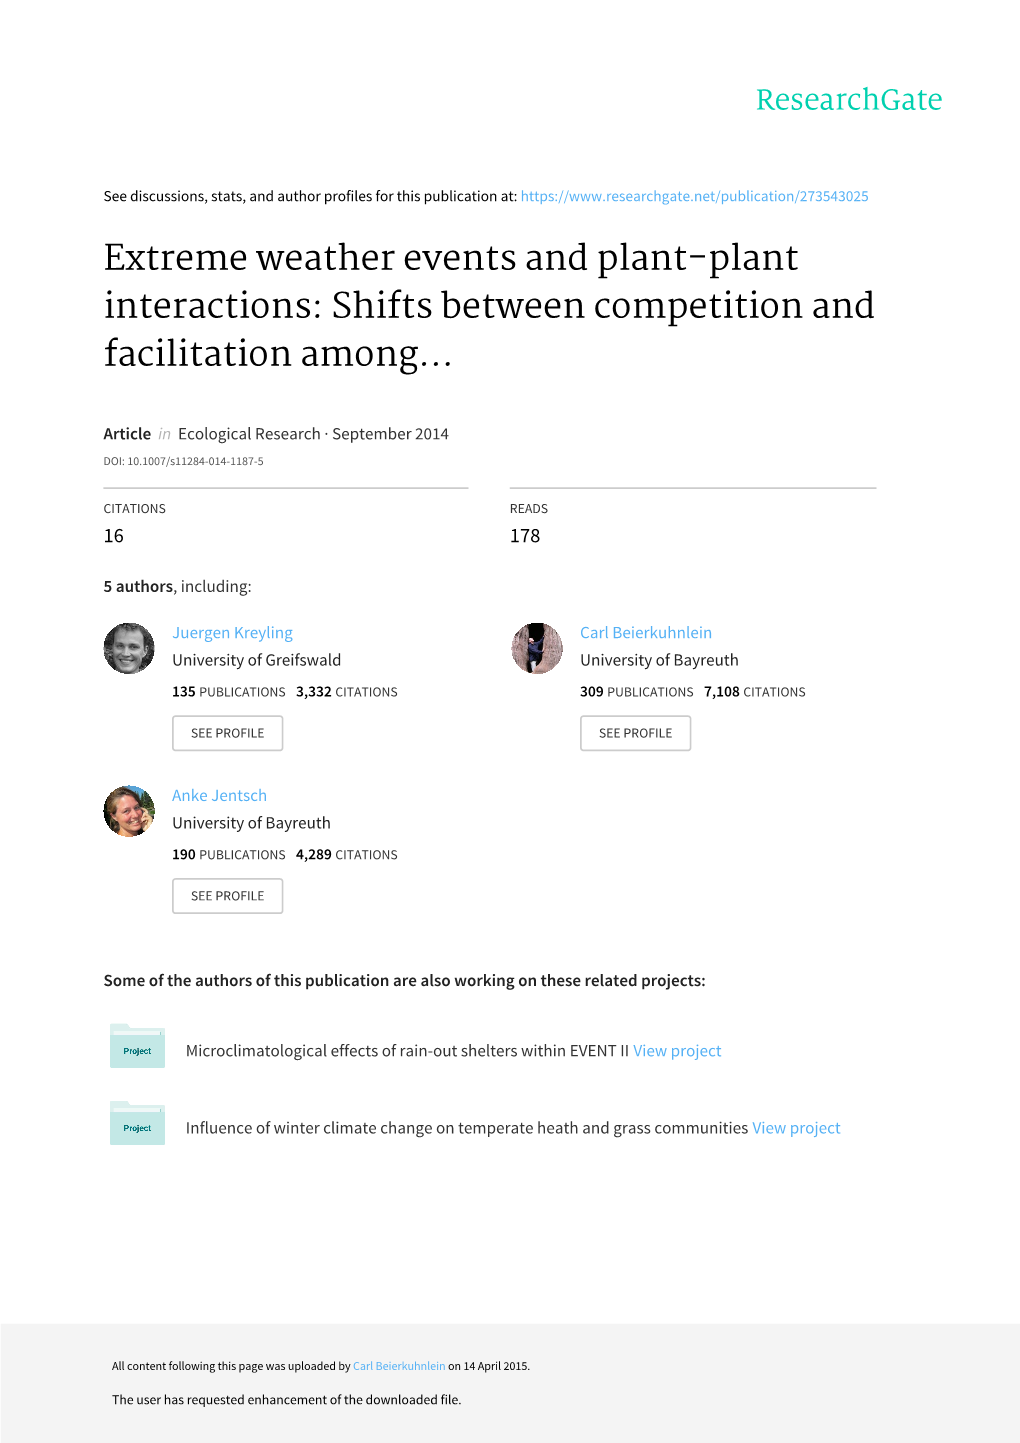 Extreme Weather Events and Plant-Plant Interactions: Shifts Between Competition and Facilitation Among